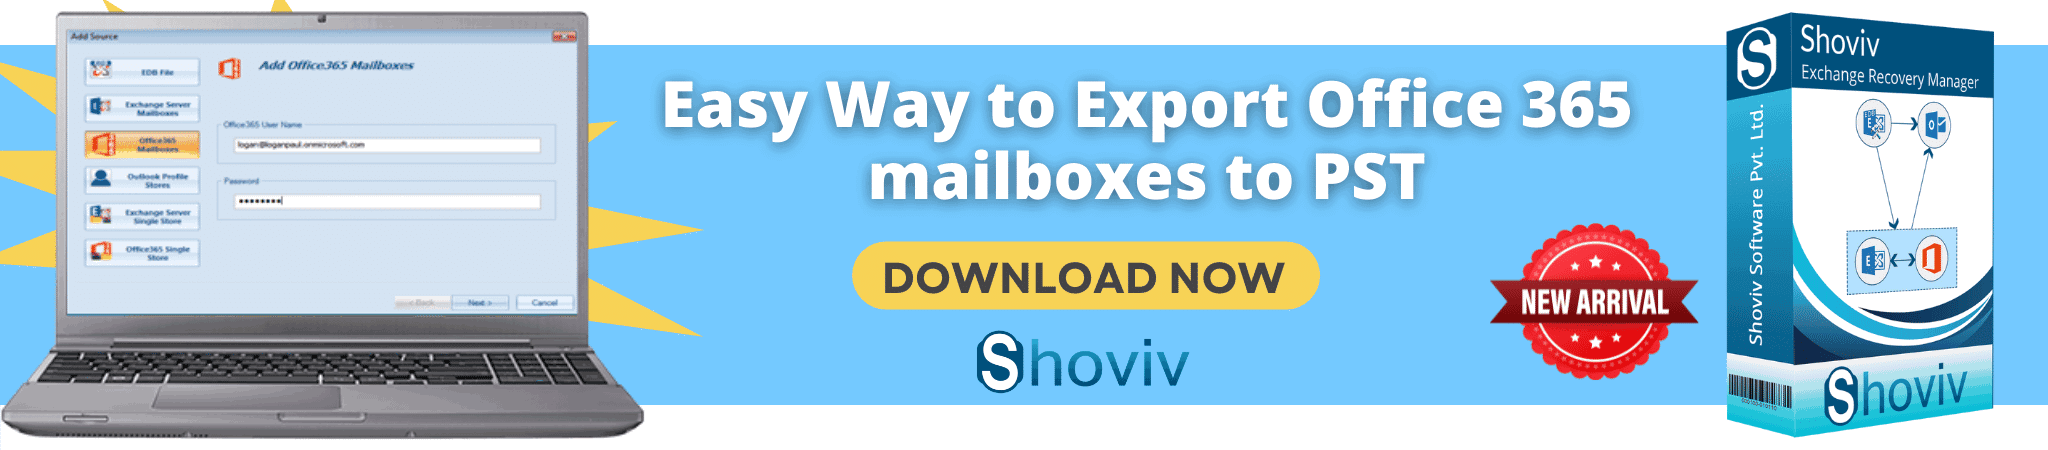 Office 365 export mailboxes to pst with shoviv